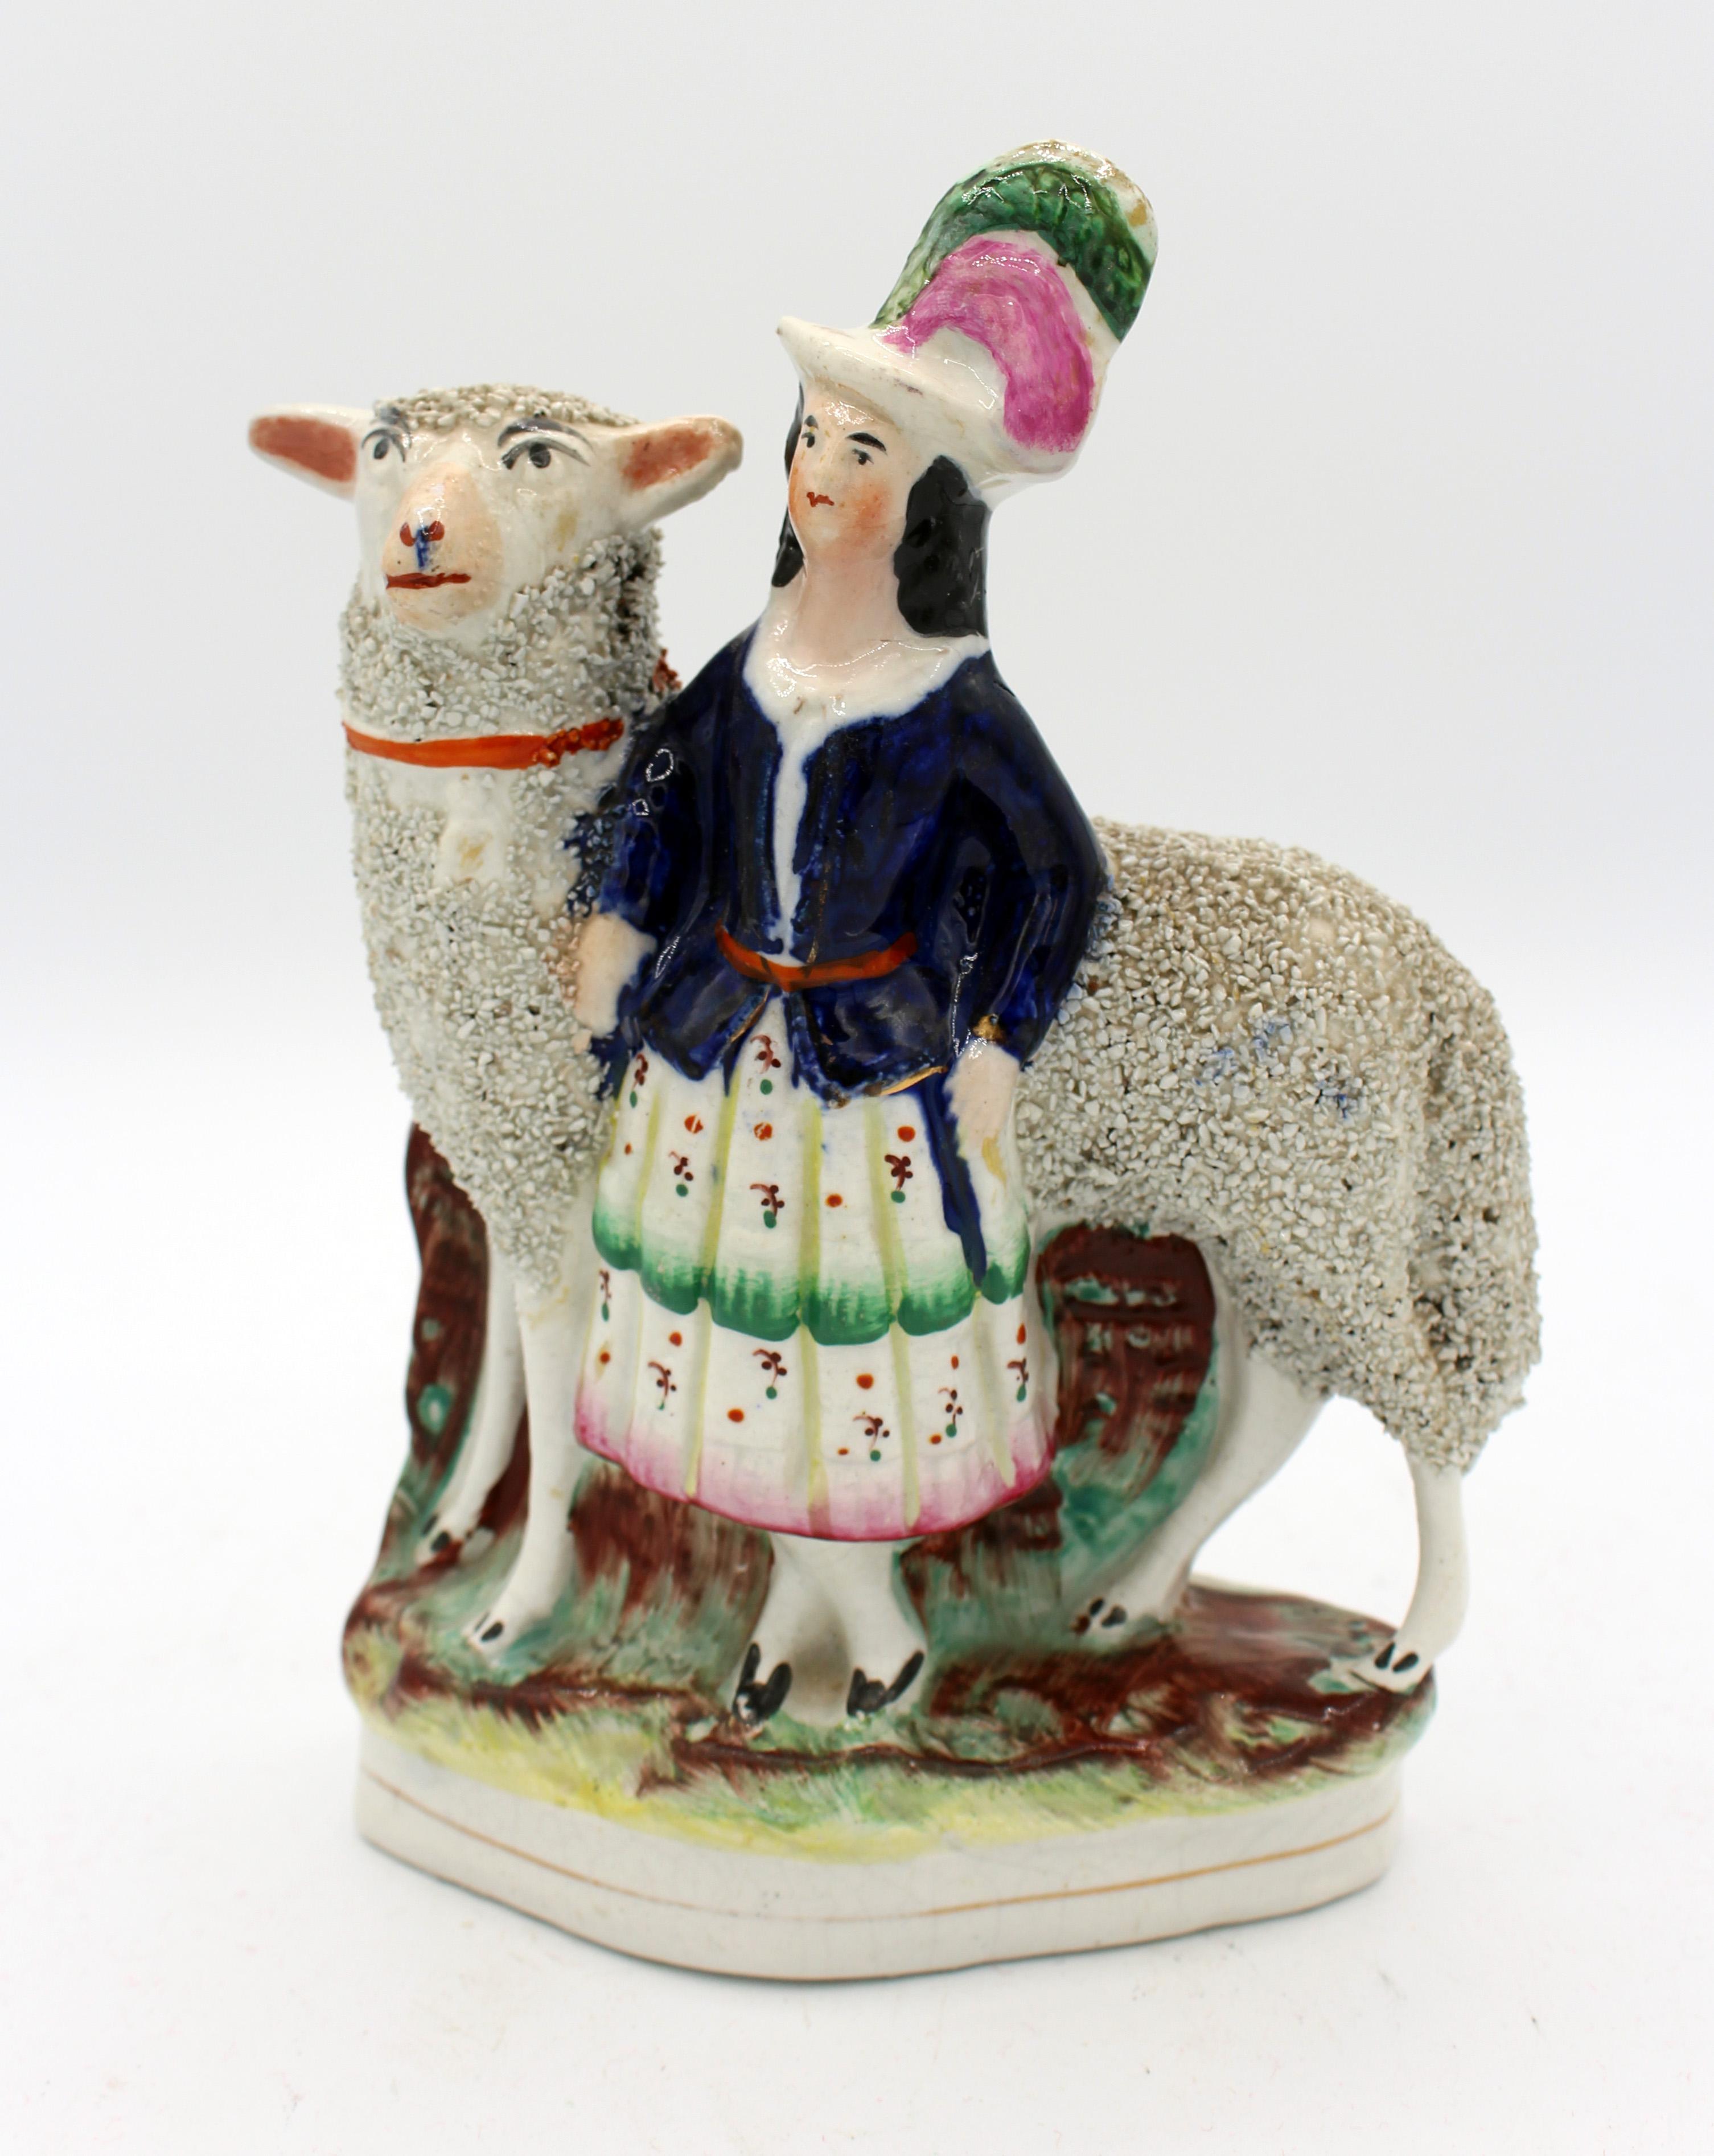 Staffordshire c.1860 figure of a Highland lass with sheep. England. Flat back; frit is used to achieve the woolly appearance. Old labels include repair history: restored sheep's ear and restuck head for lass. 7 5/8